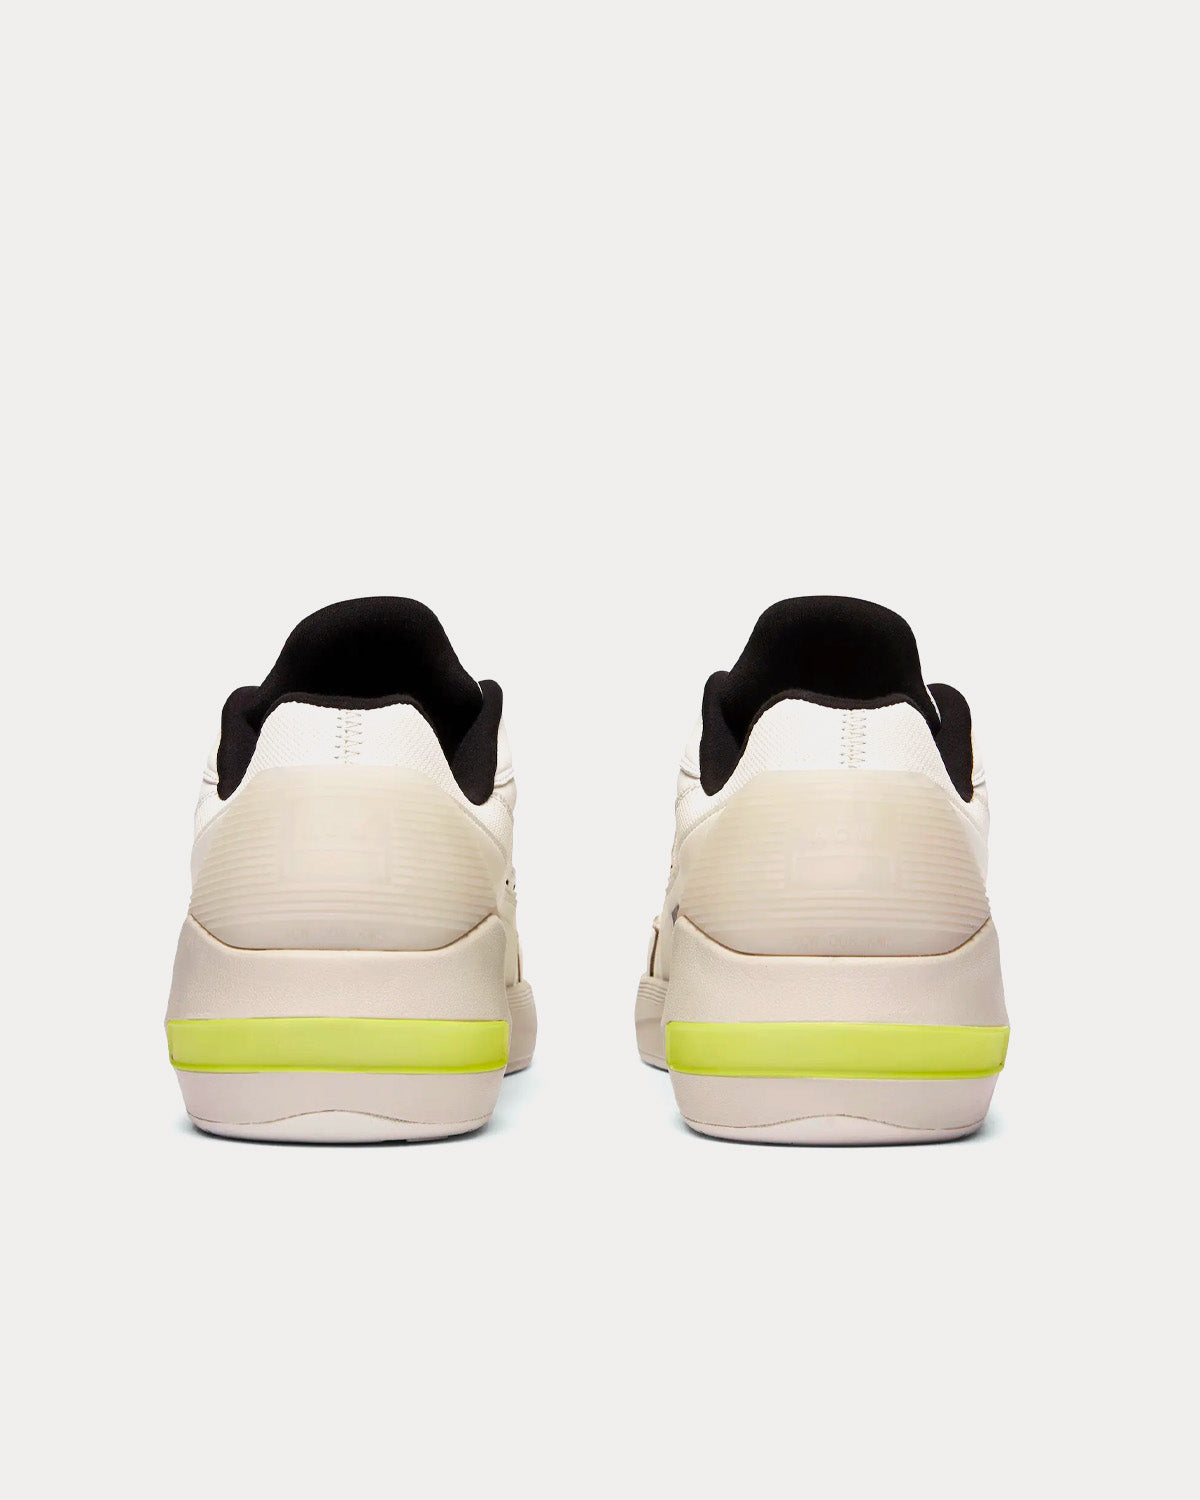 A-COLD-WALL* - Vector* Runner Off-White / Fluo Yellow Low Top Sneakers